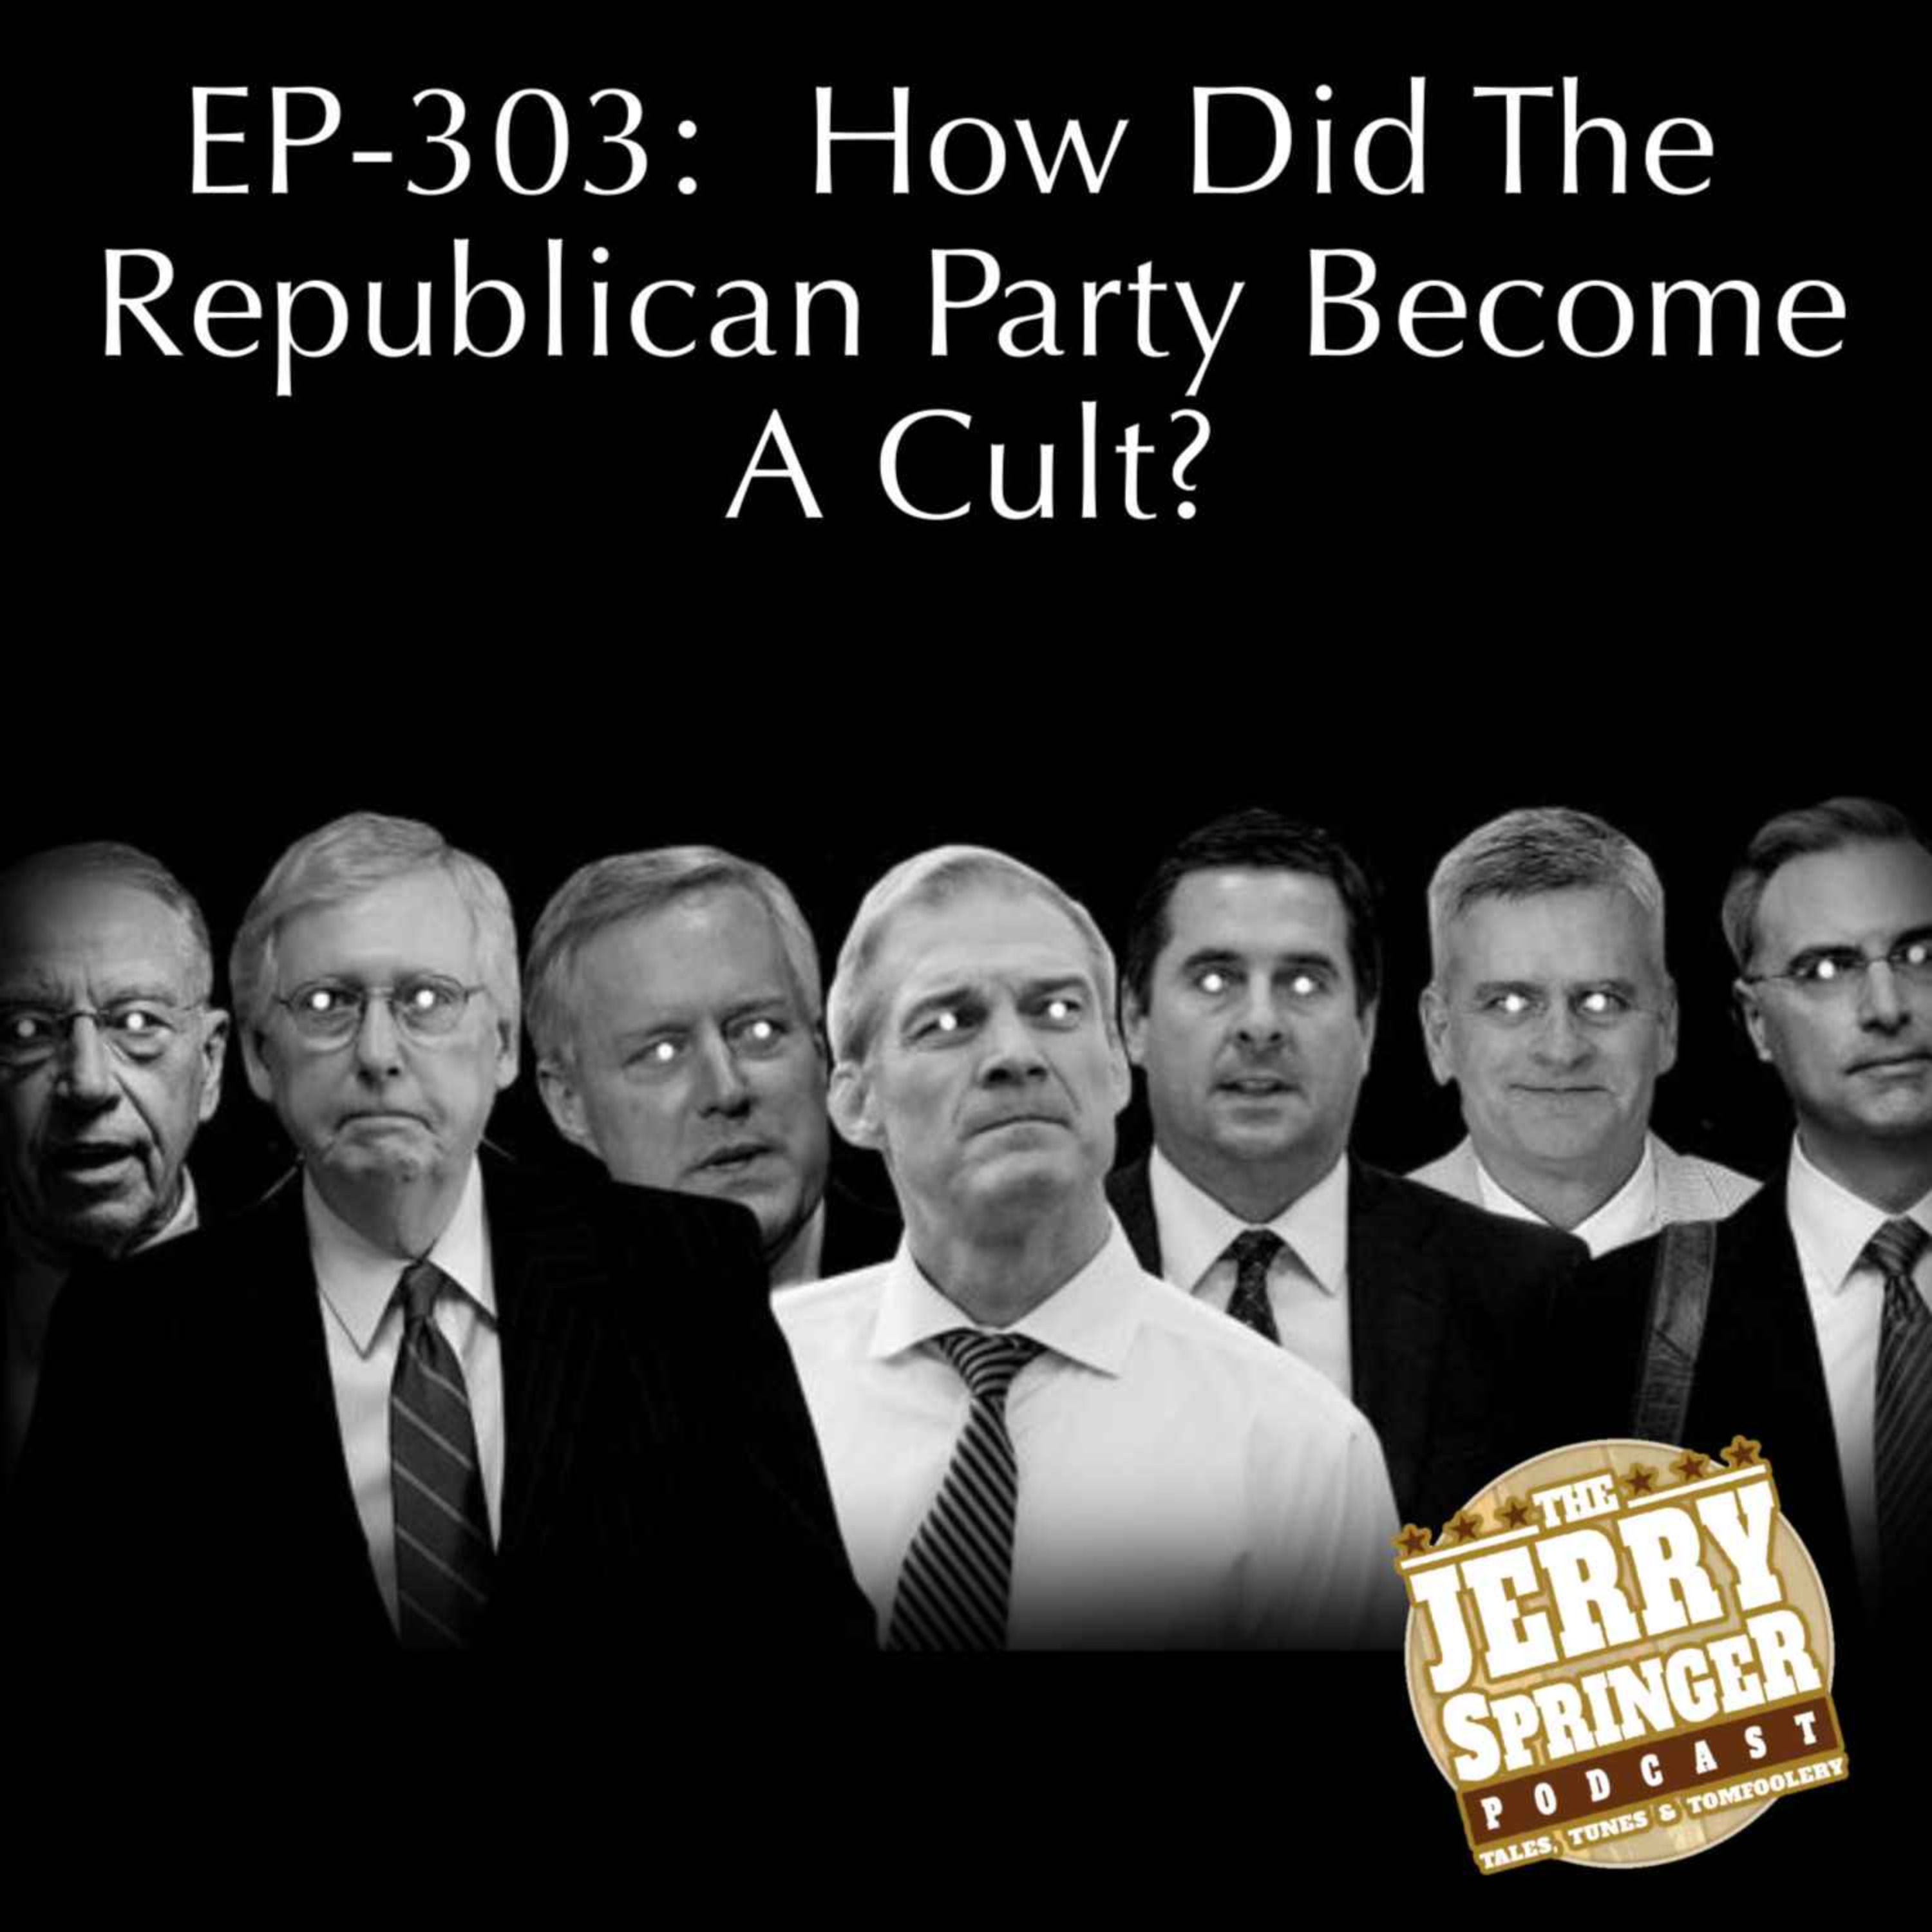 How Did The Republicans Become a Cult: EP-303